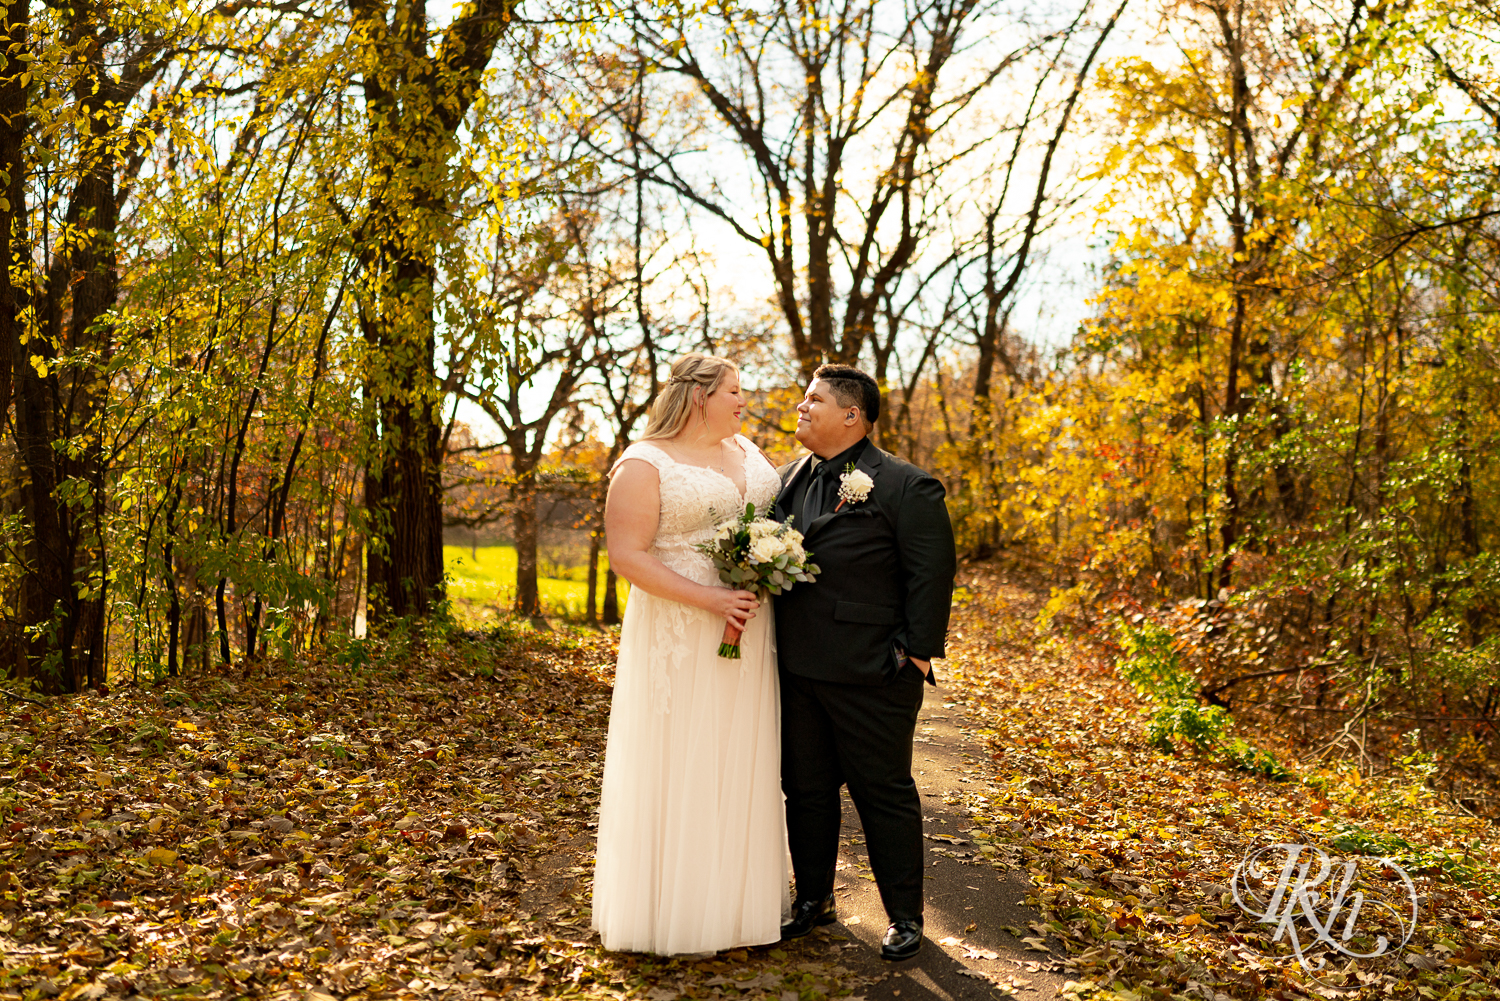 Lesbian brides smile in fall leaves at the Eagan Community Center in Eagan, Minnesota.